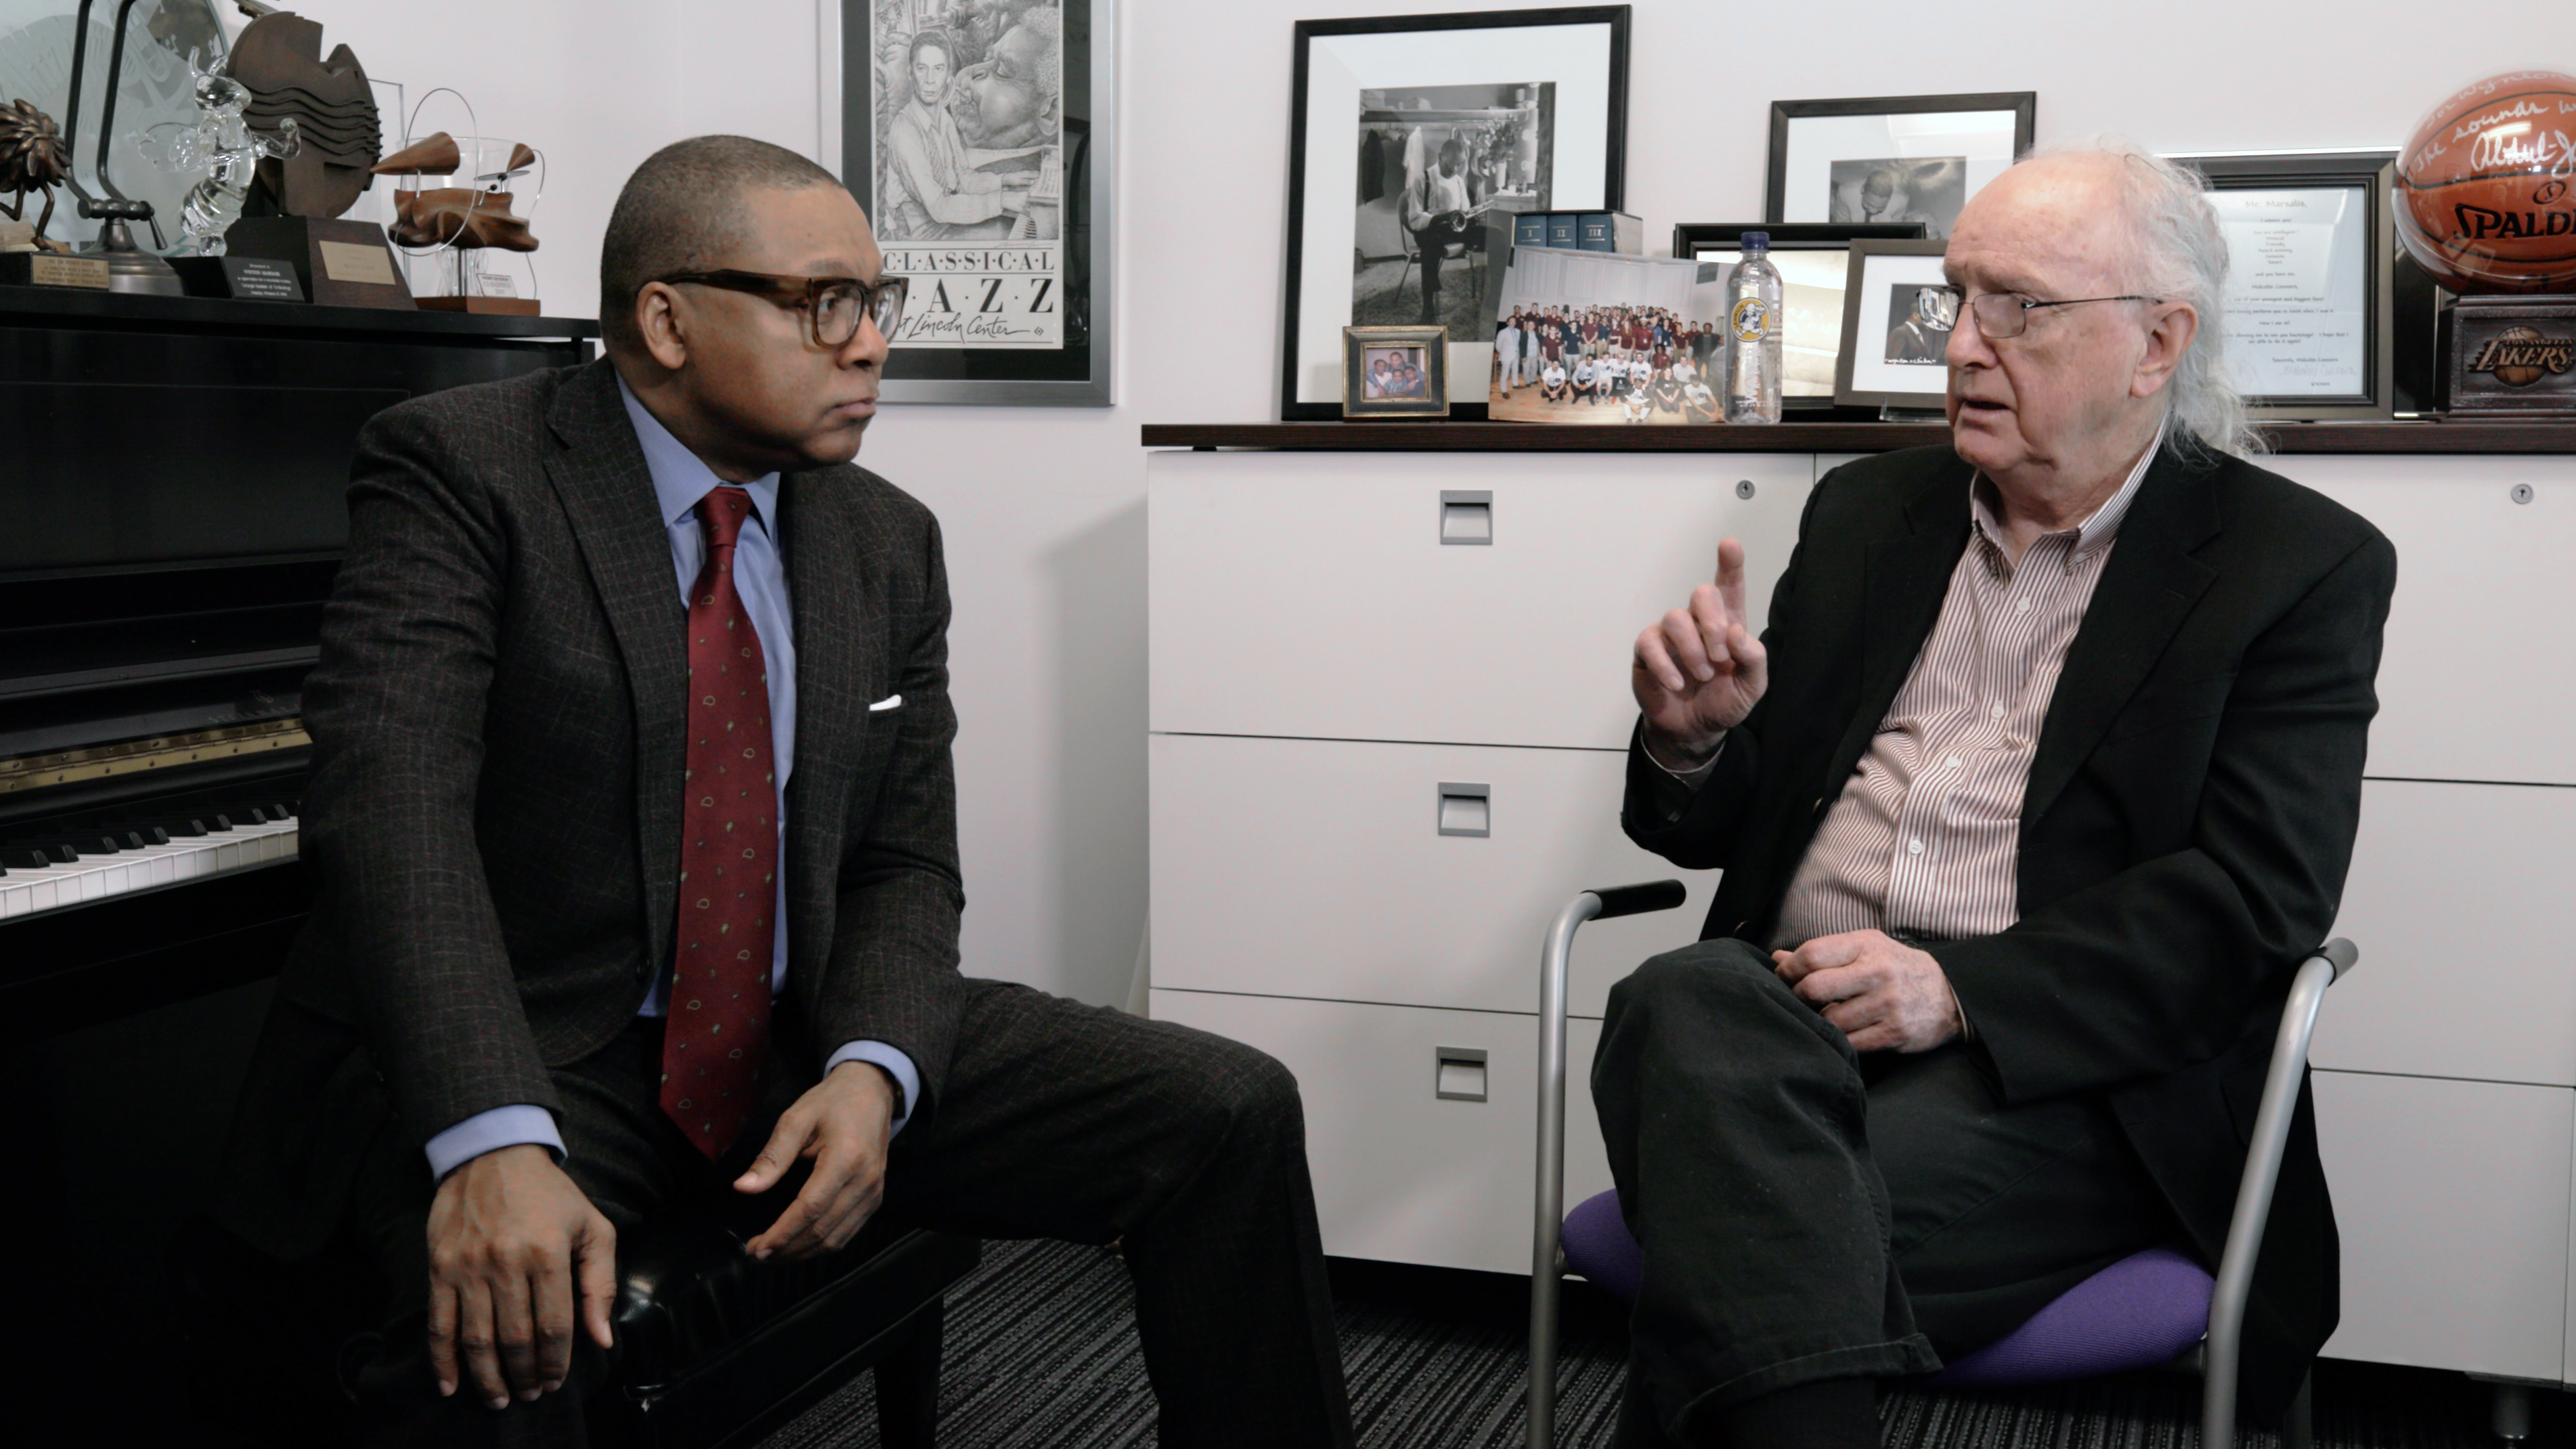 Jack Healey with renowned trumpeter and activist Wynton Marsalis.